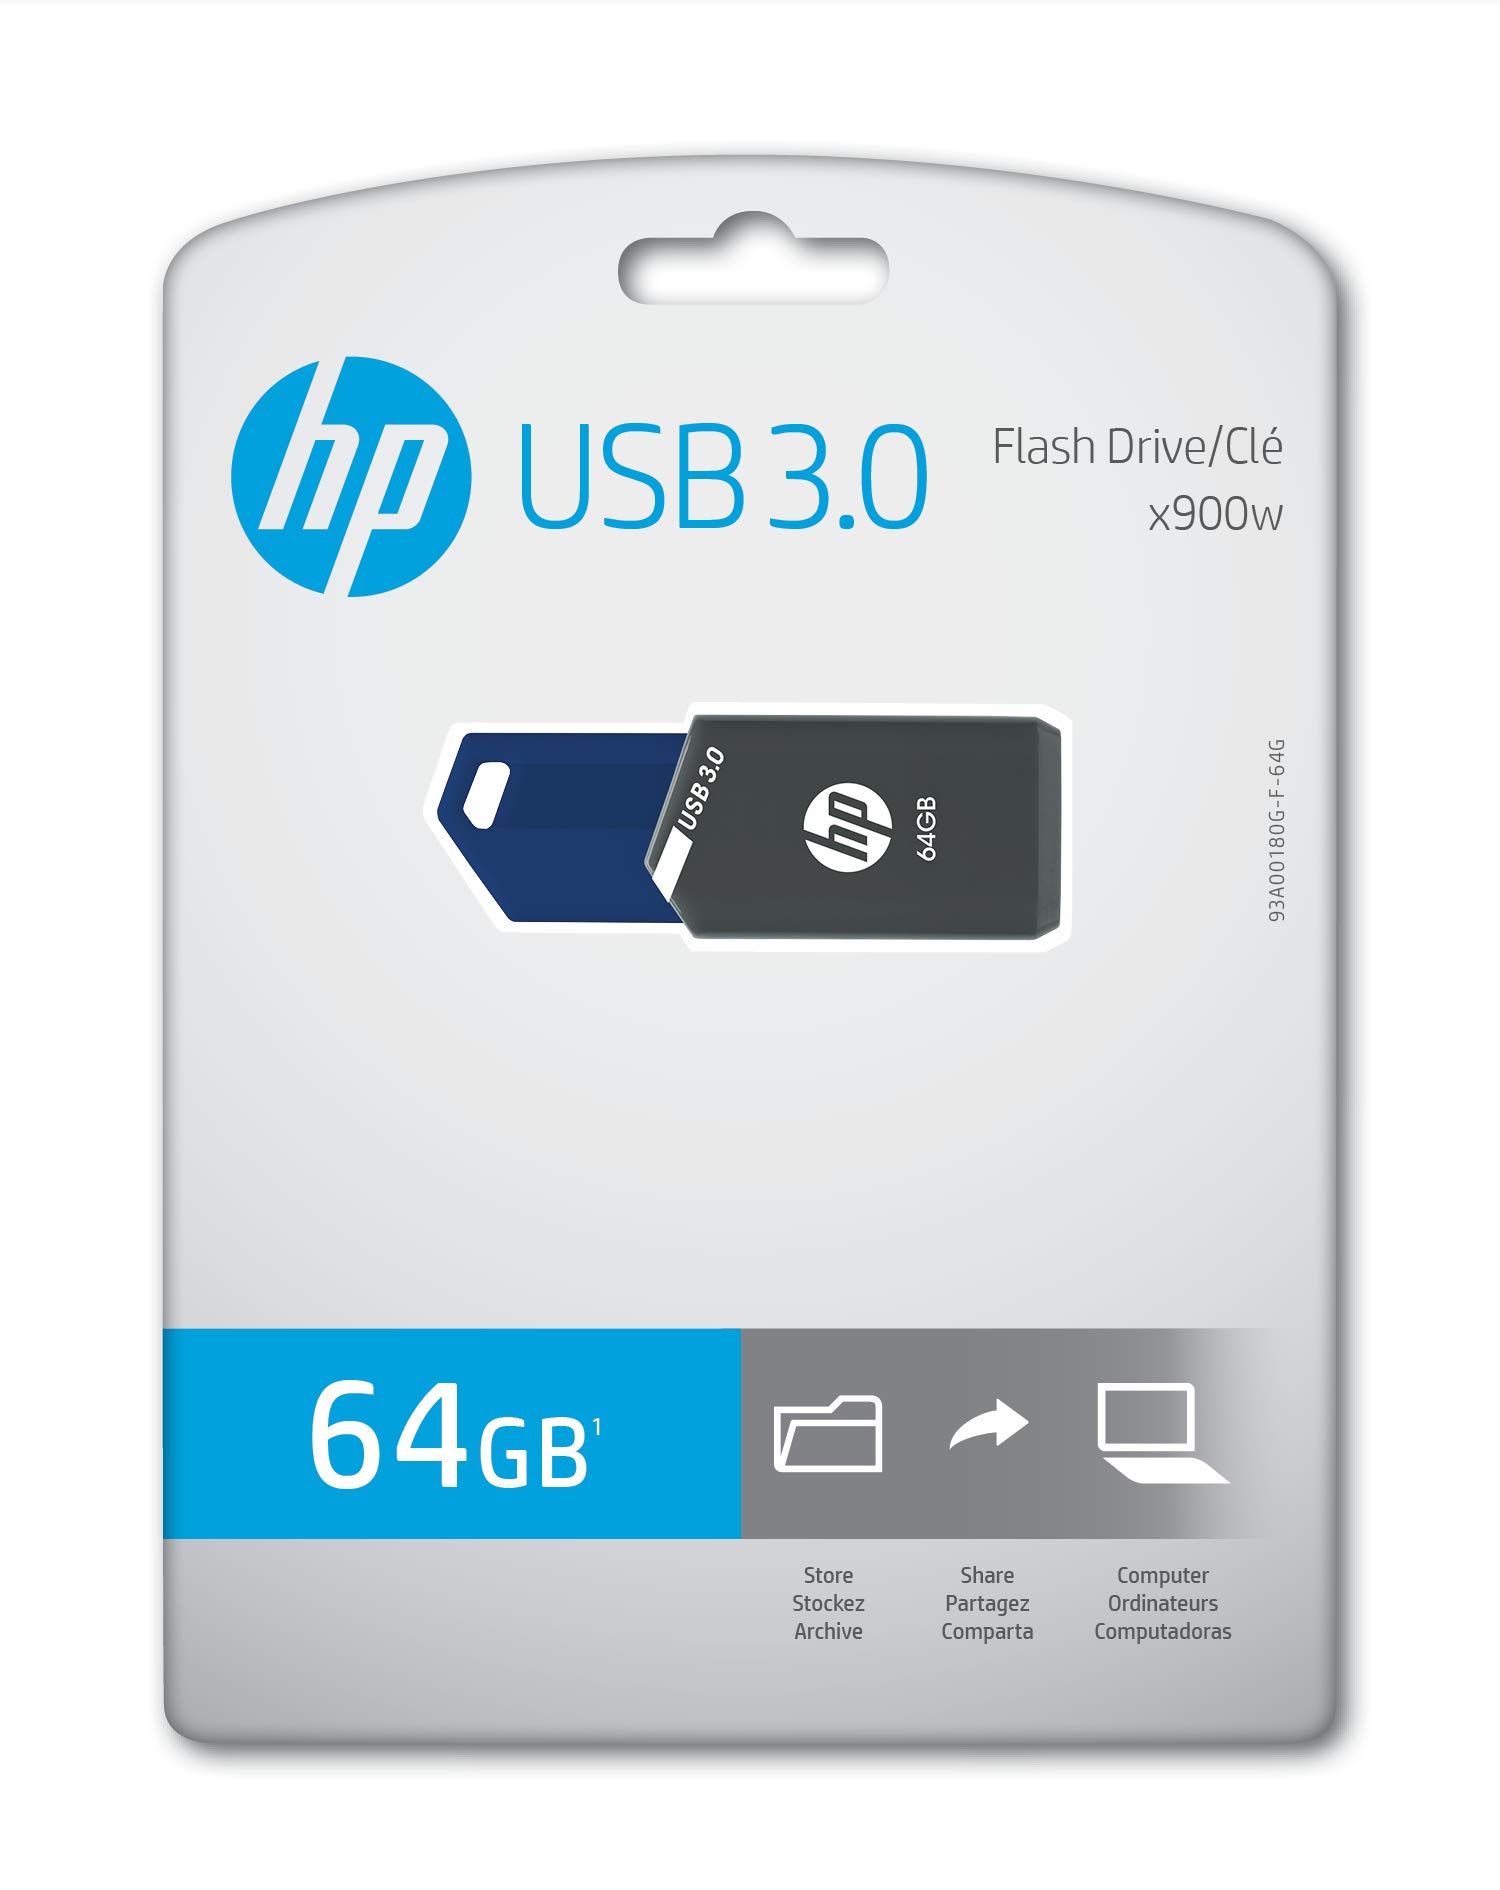 HP 64GB x900w USB 3.0 Flash Drive $5.97 or $15.99 (Pack of 3 = $5.33 ea) Also, 128gb $10ea in 2 pack@ Amazon